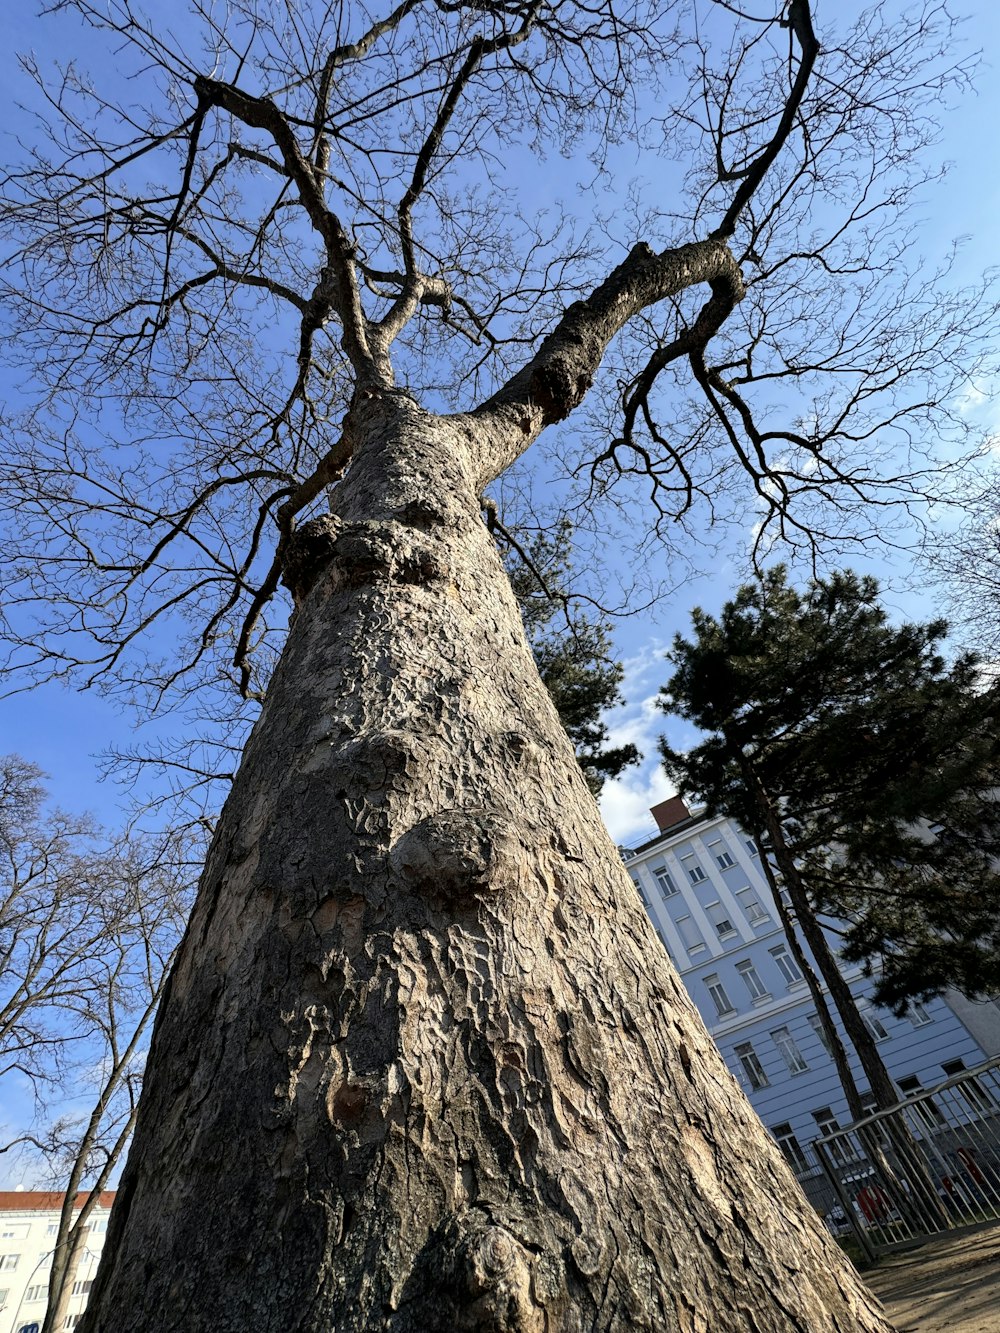 a very tall tree with no leaves on it